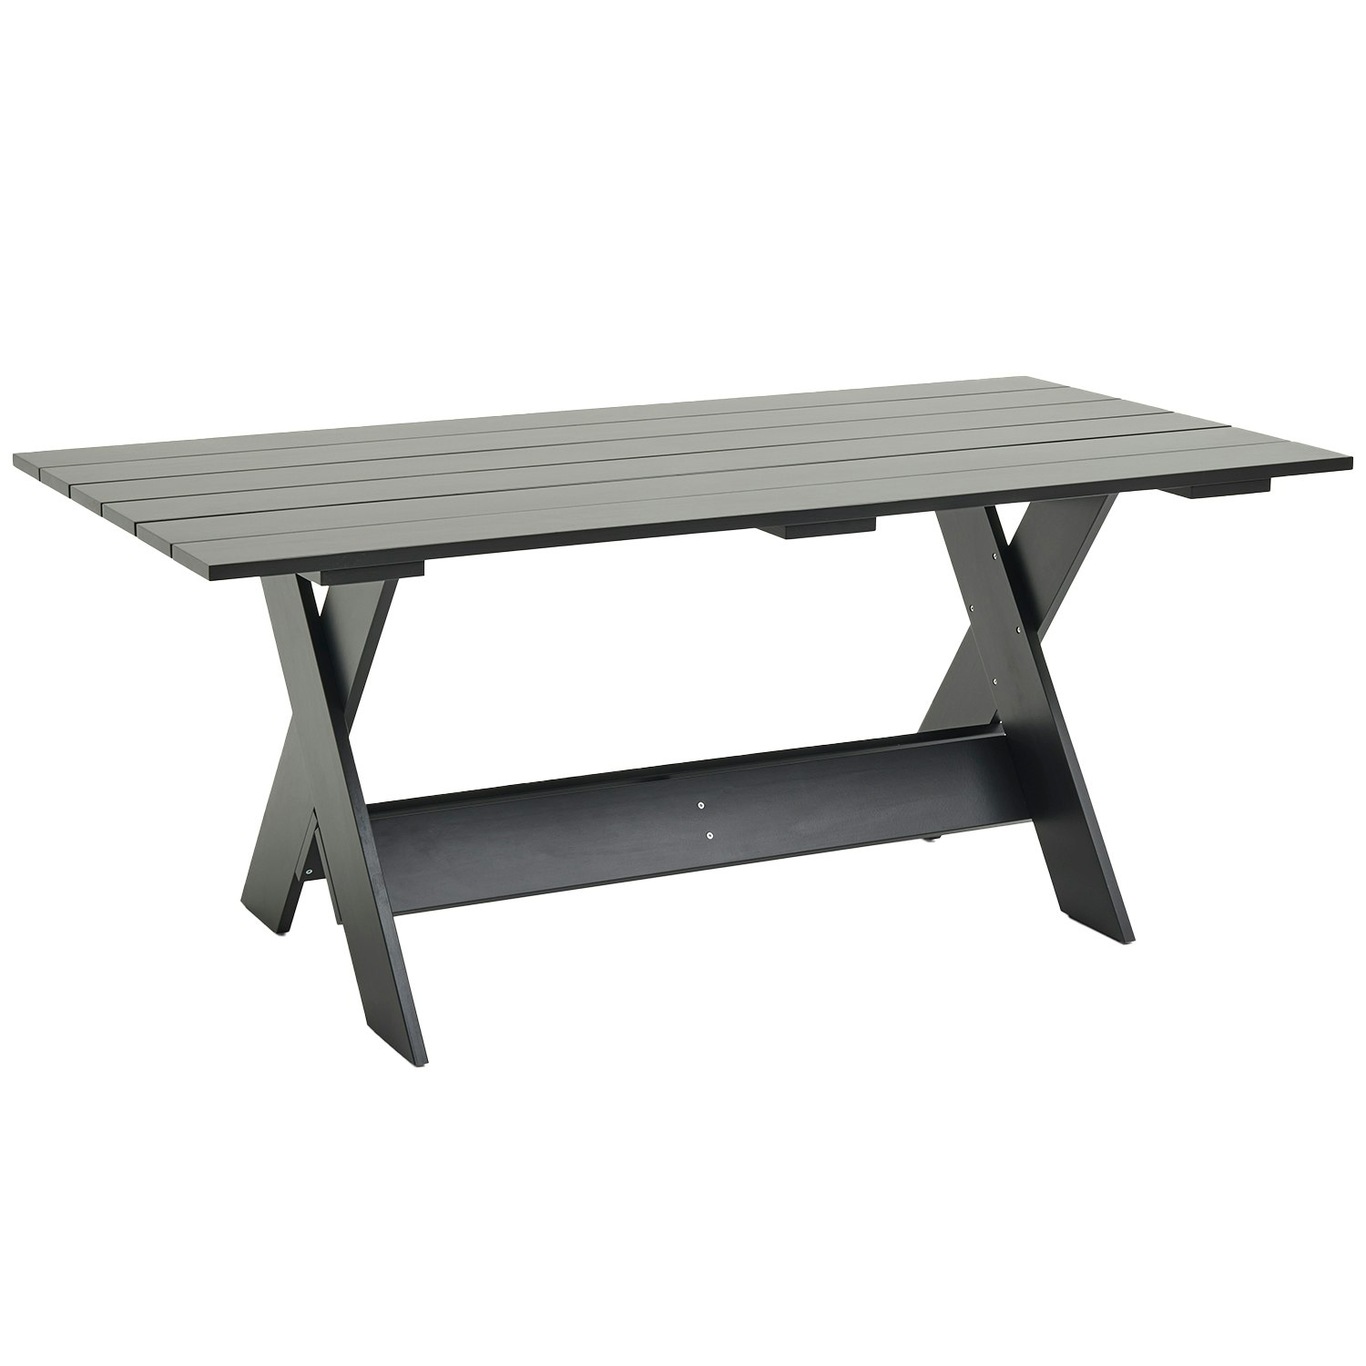 Crate Dining Table 90x180 cm, Black